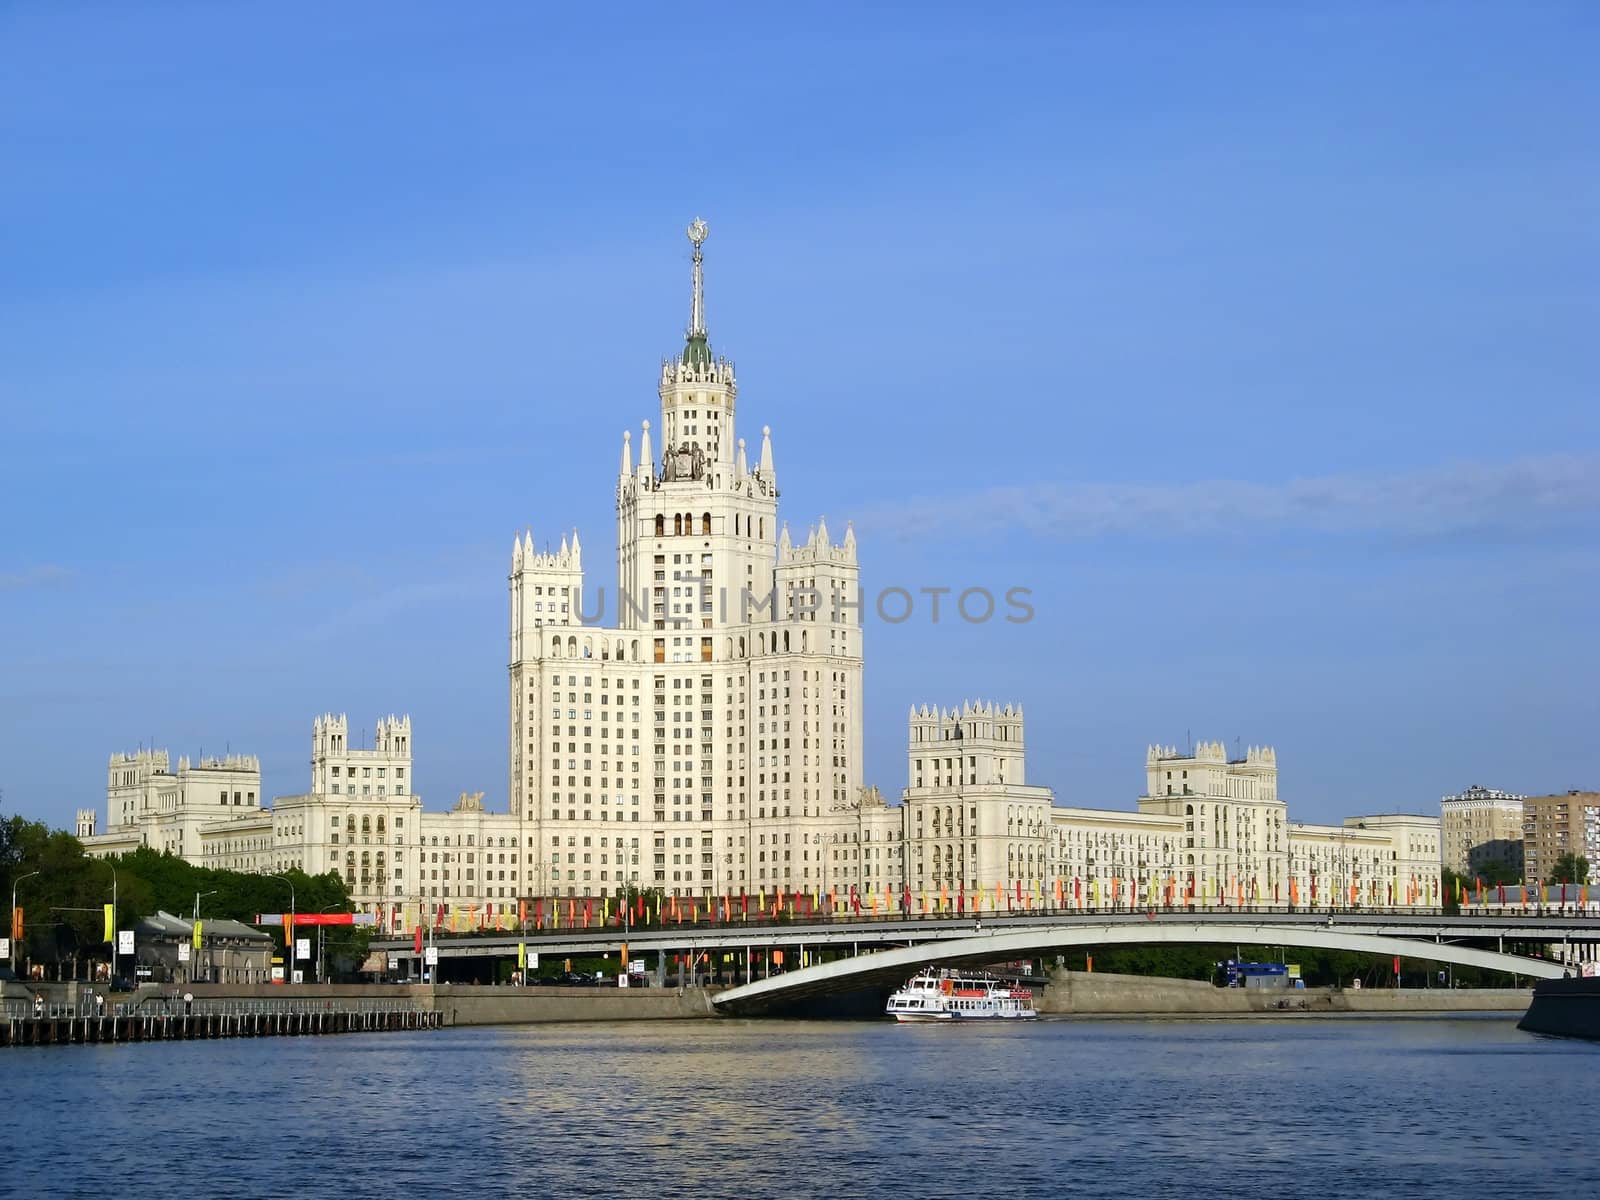 Stalin's Empire style building by swisshippo